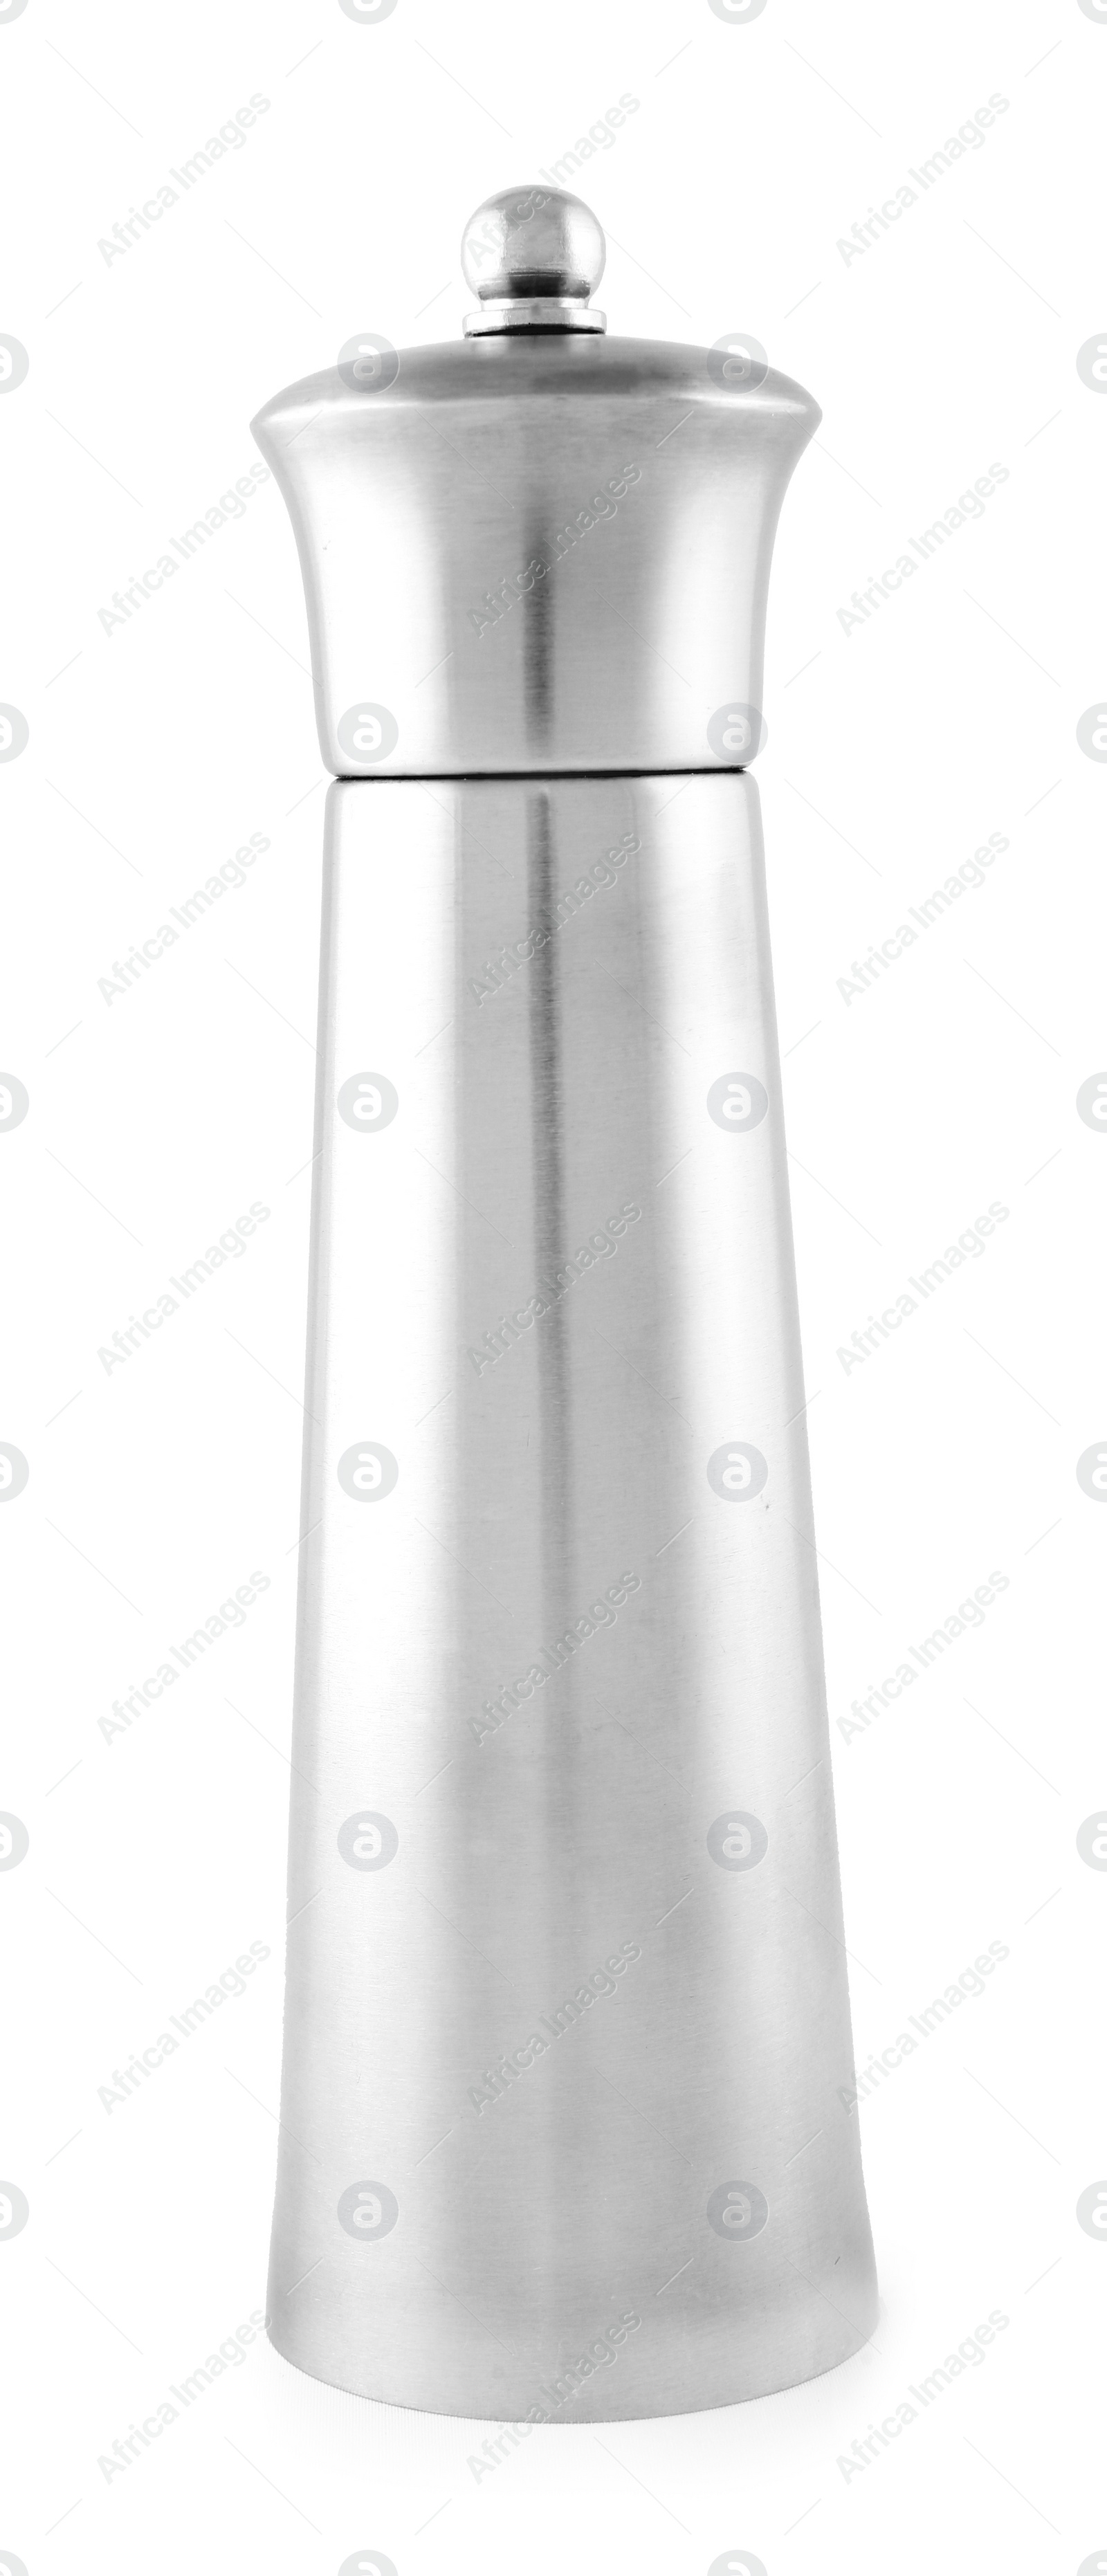 Photo of Stainless steel spice shaker isolated on white